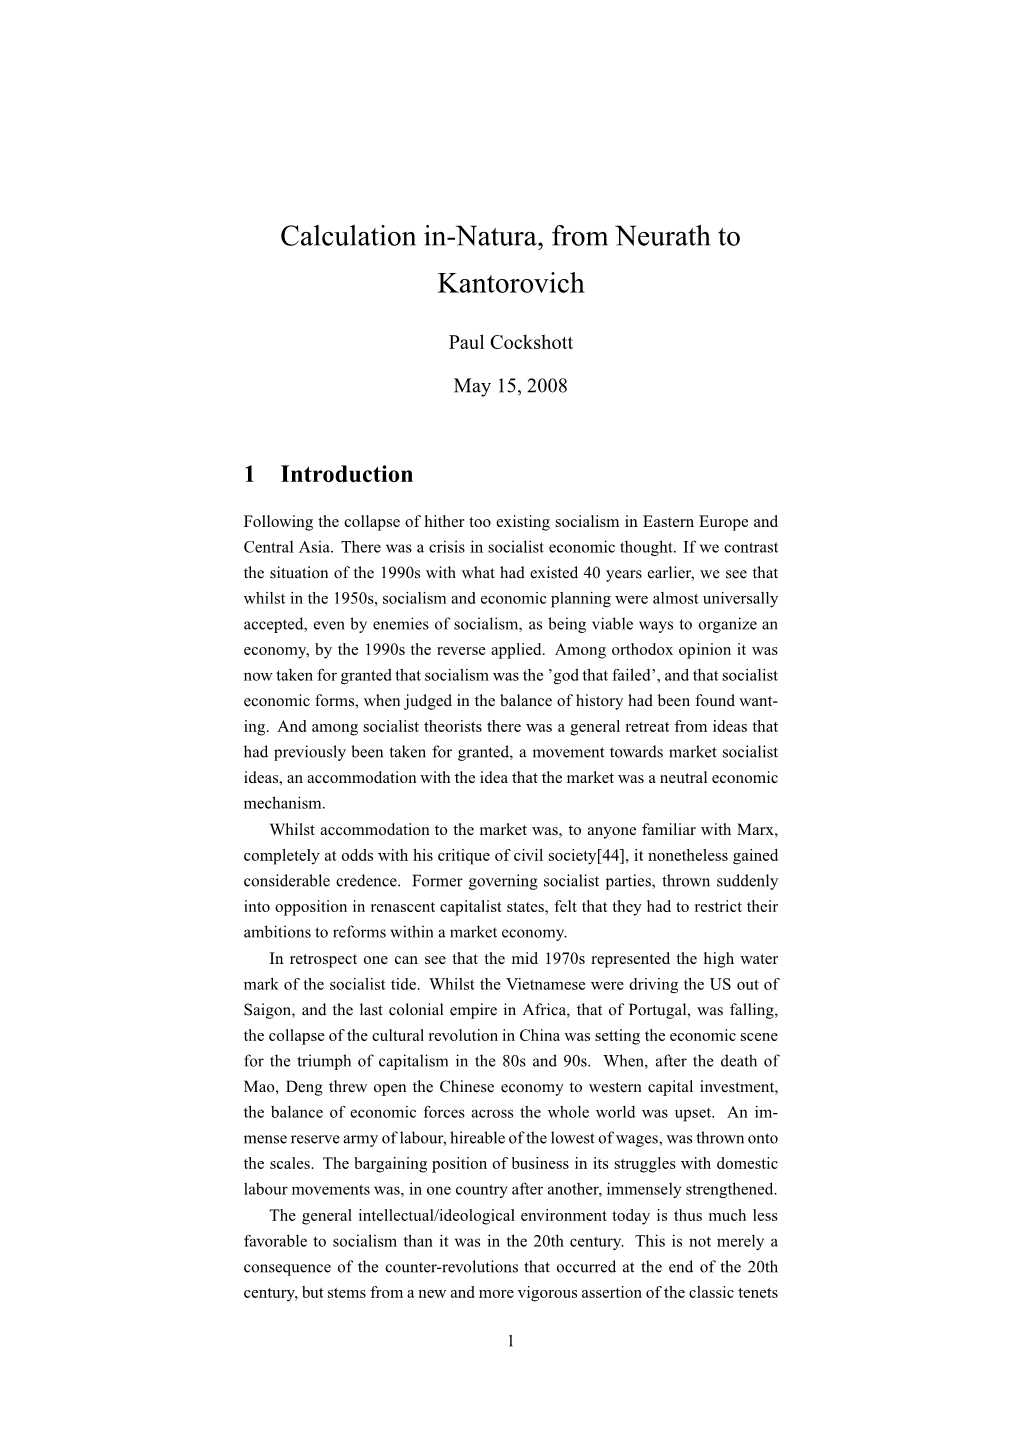 Calculation In-Natura, from Neurath to Kantorovich